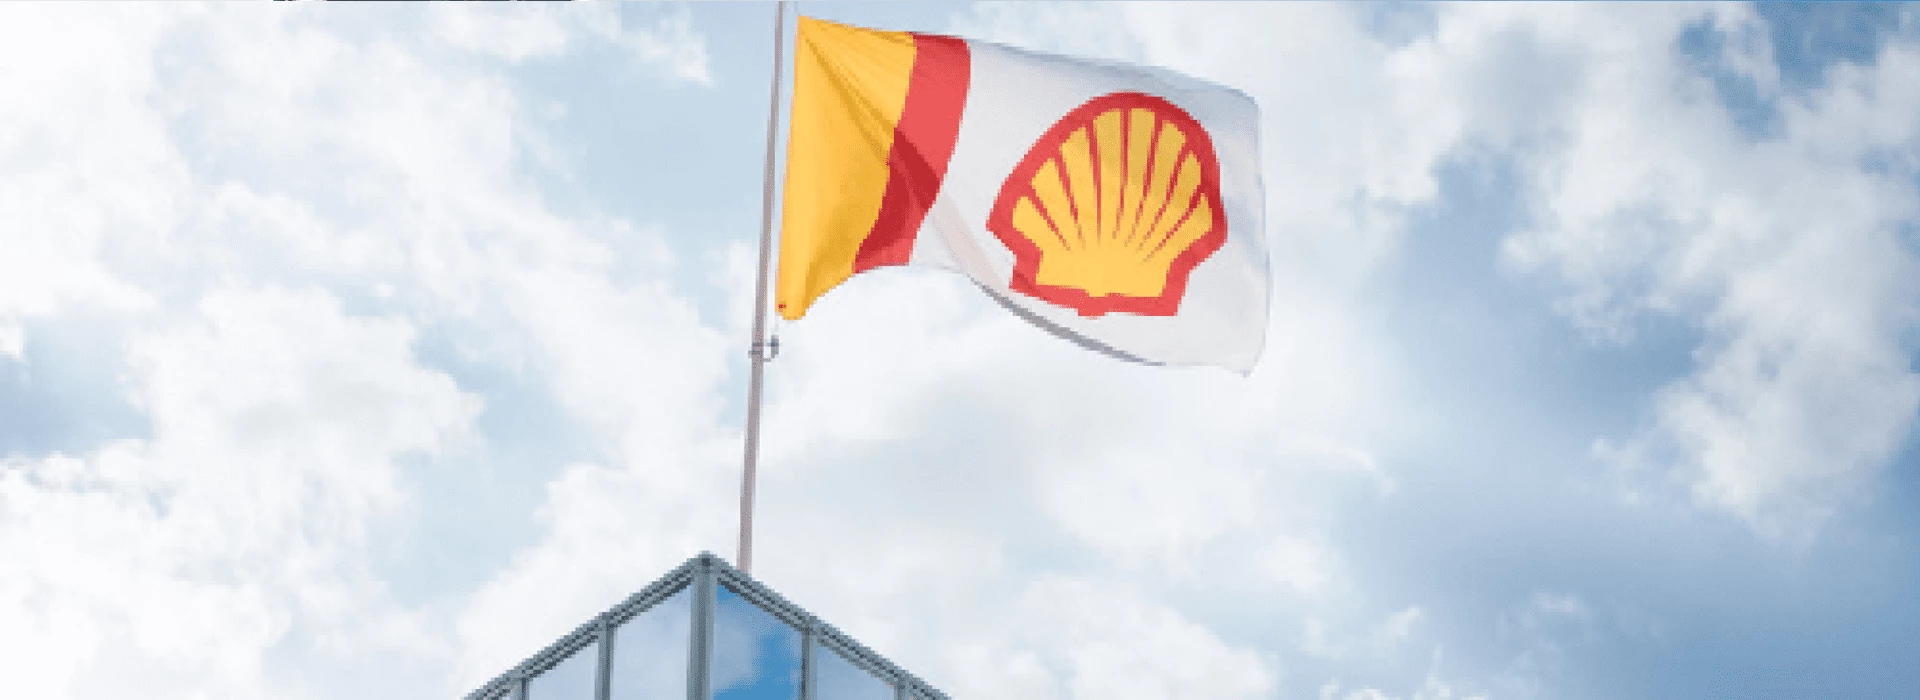 Shell invests in plastic waste-to-chemicals technology company BlueAlp.